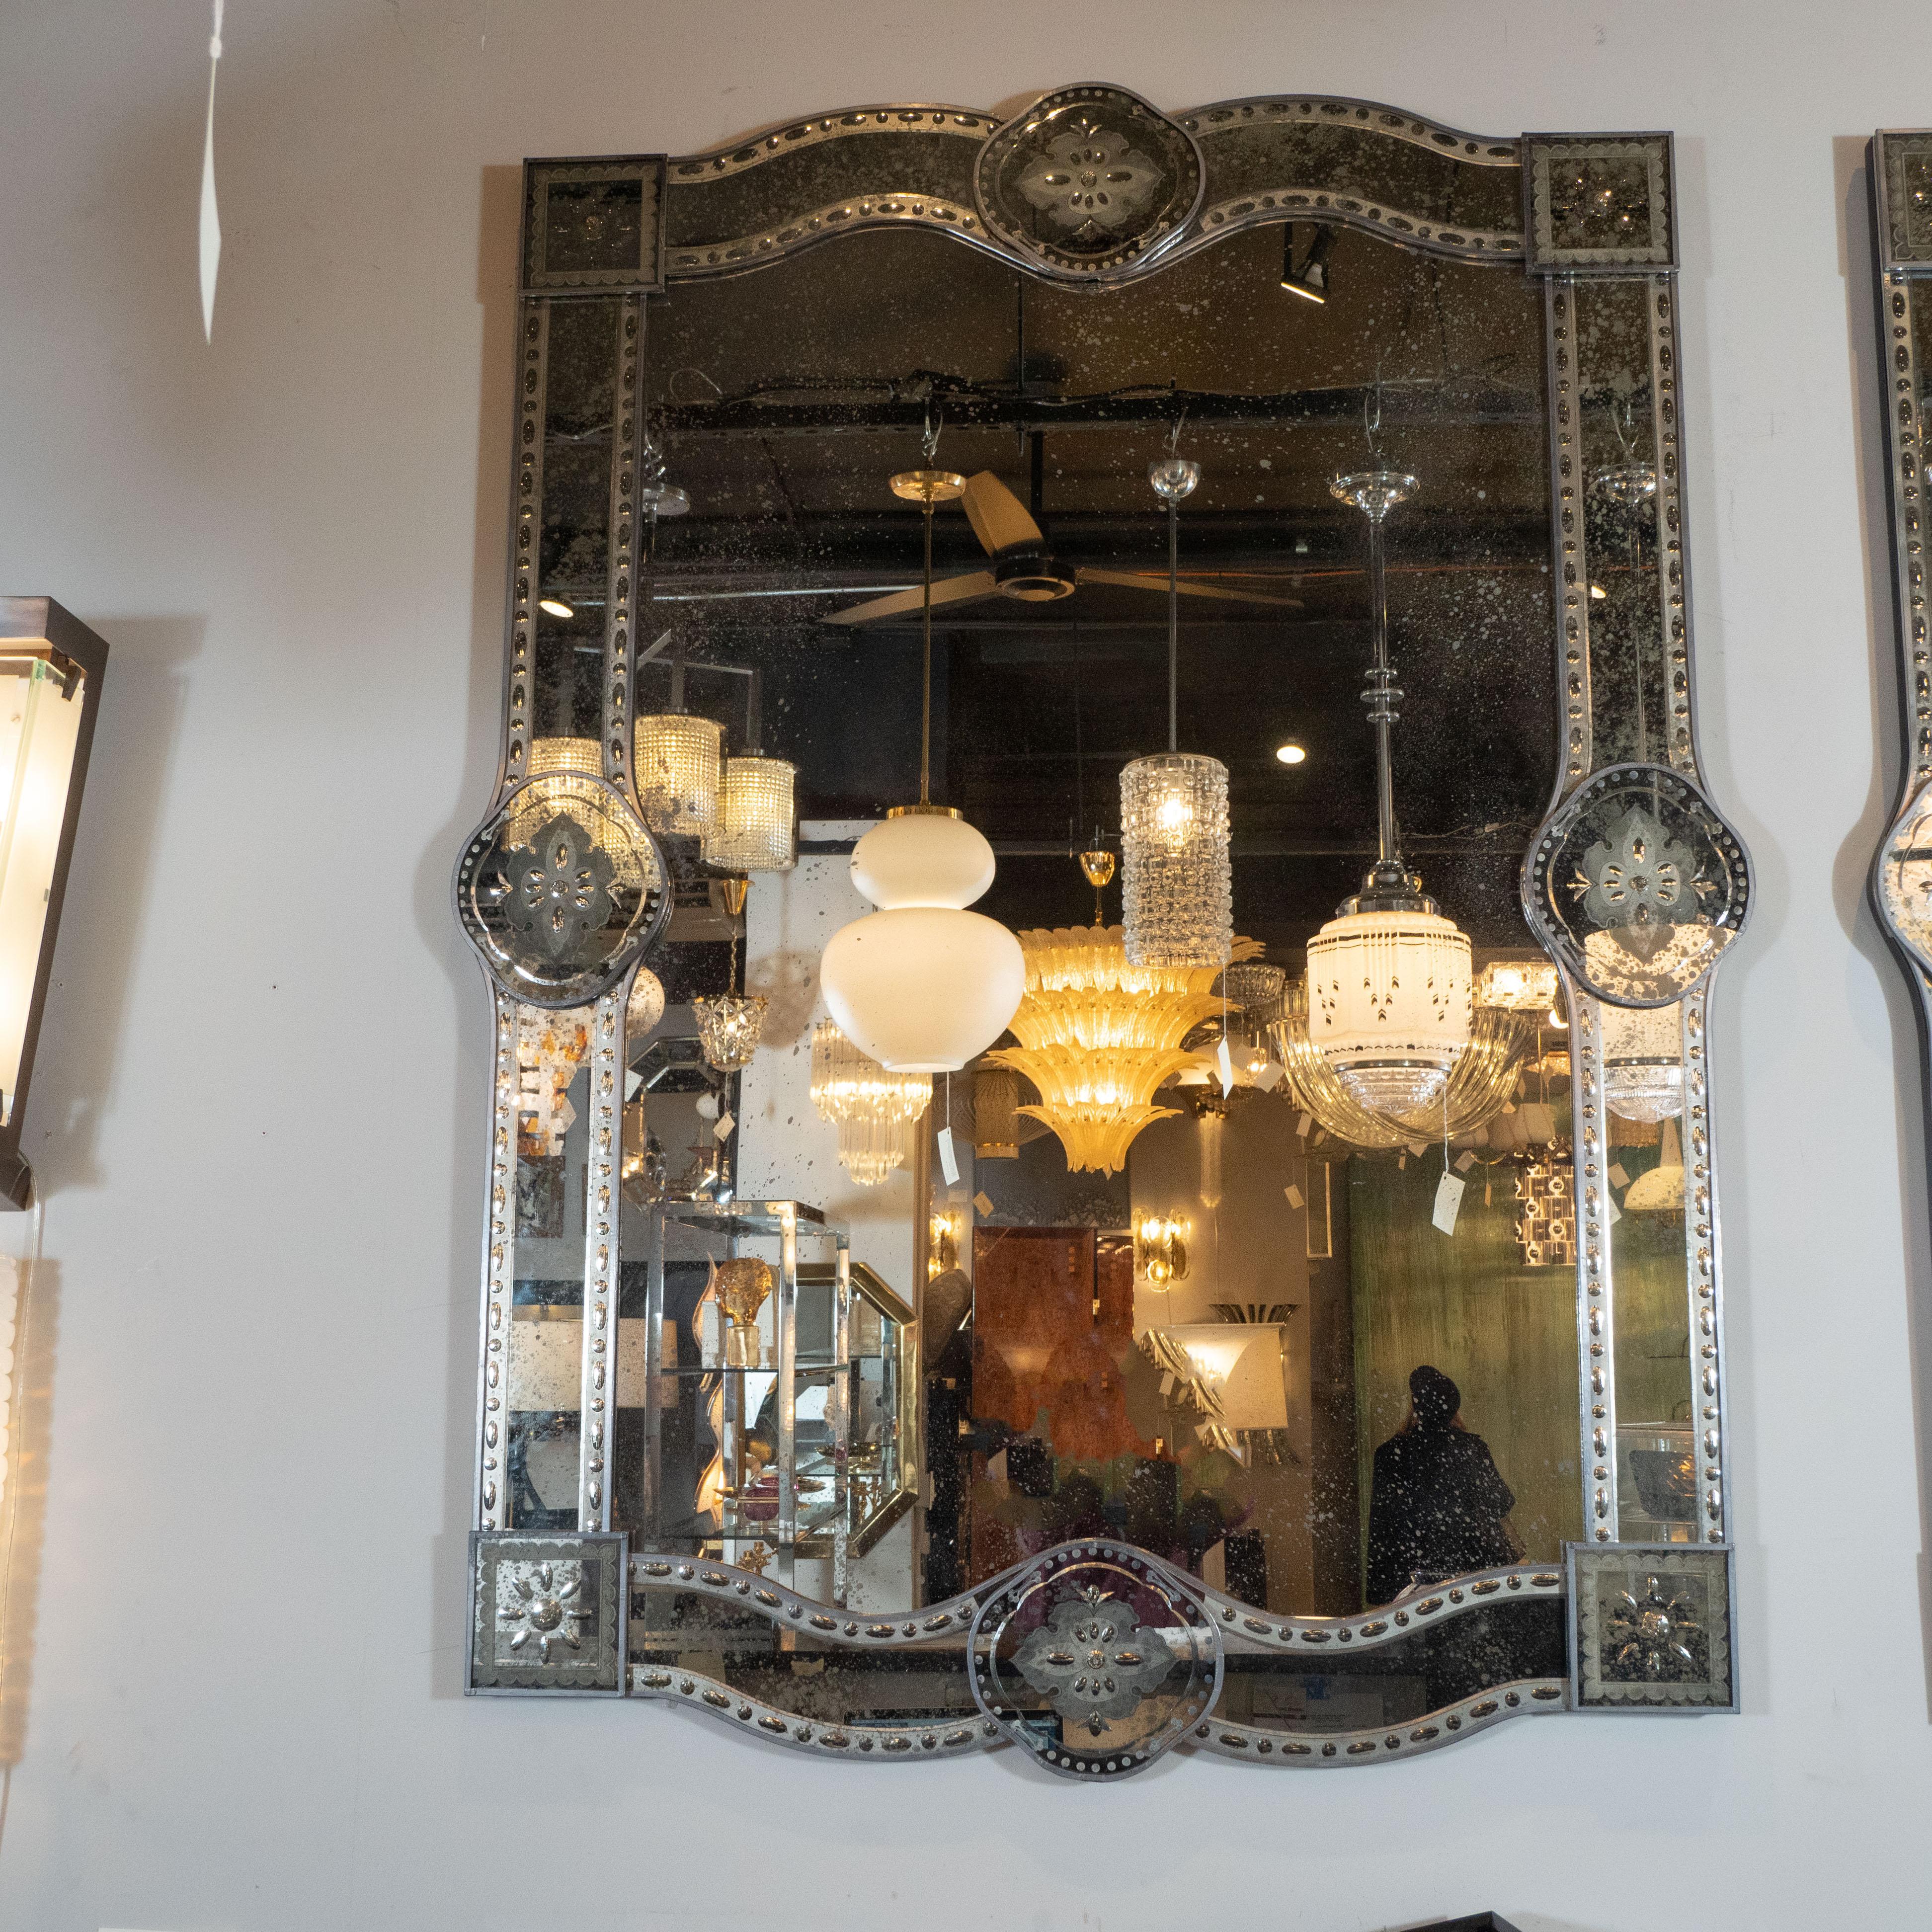 This stunning Hollywood mirror was realized in Italy, circa 1950. It offers silvered rectangular forms with an undulating top. The sides are overlaid on the base with additional panels in the center of each side as well as the corners, creating a